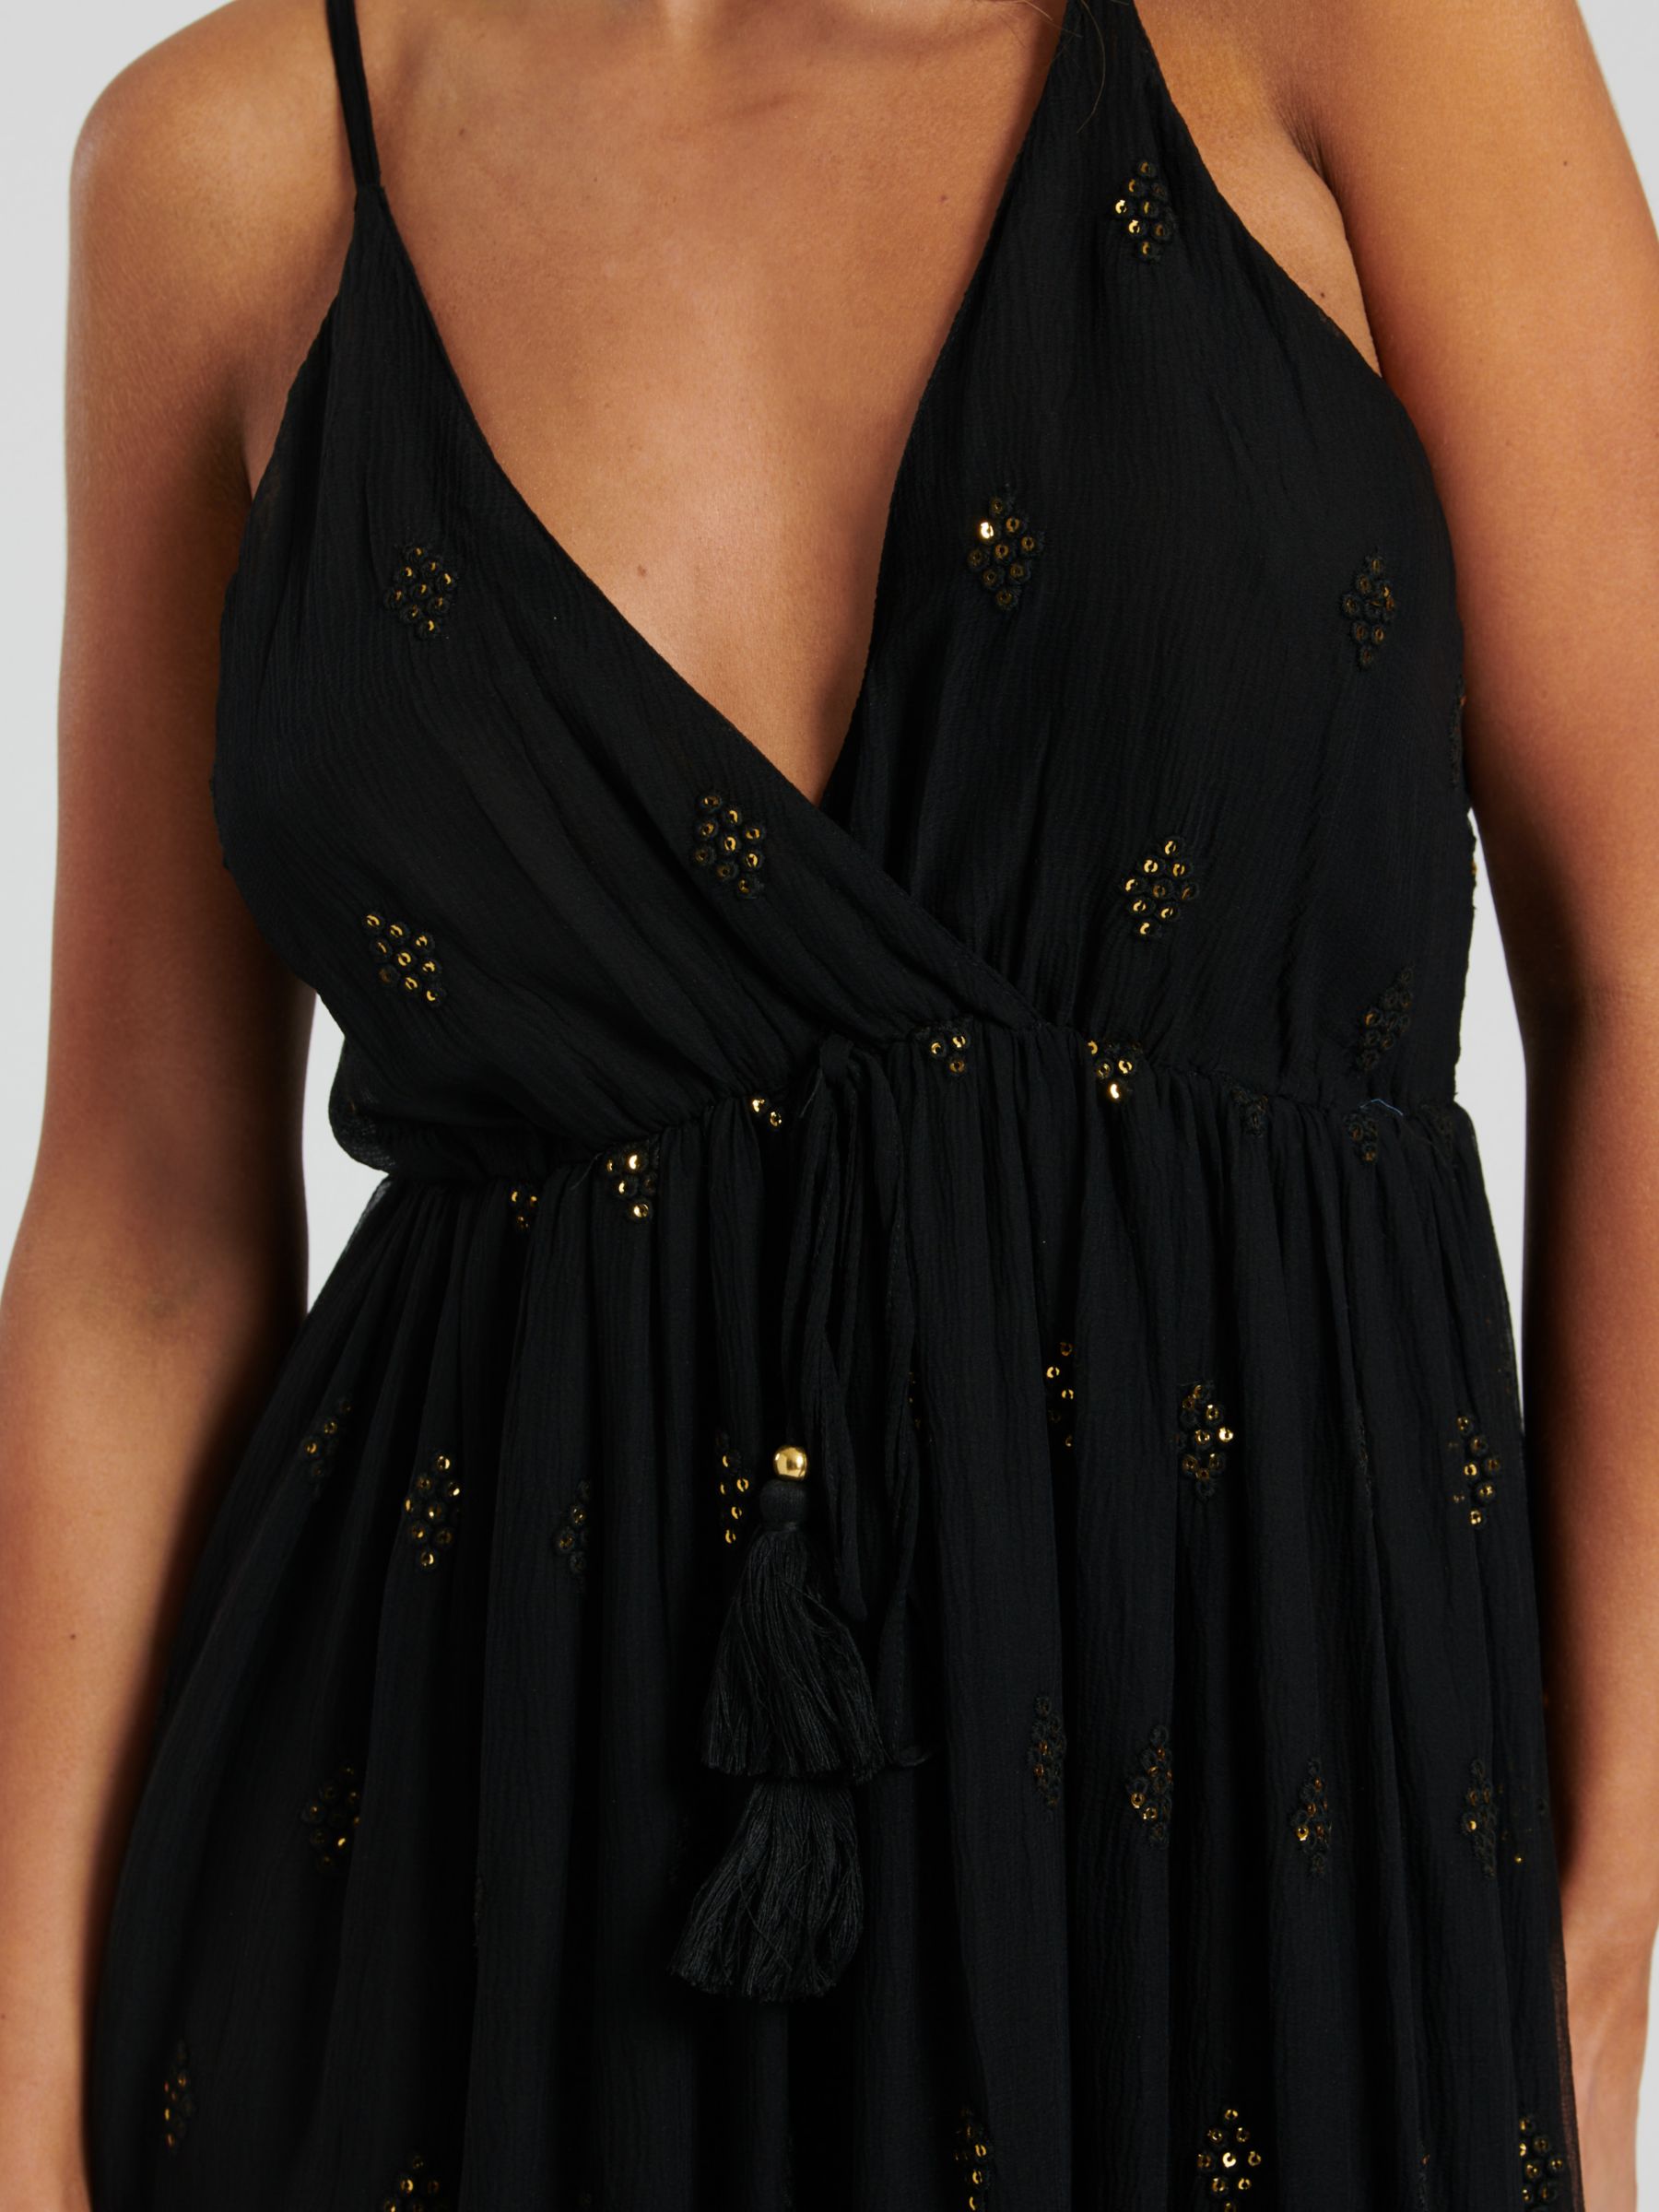 South Beach Sequin Detail Tiered Maxi Dress, Black/Gold, 8